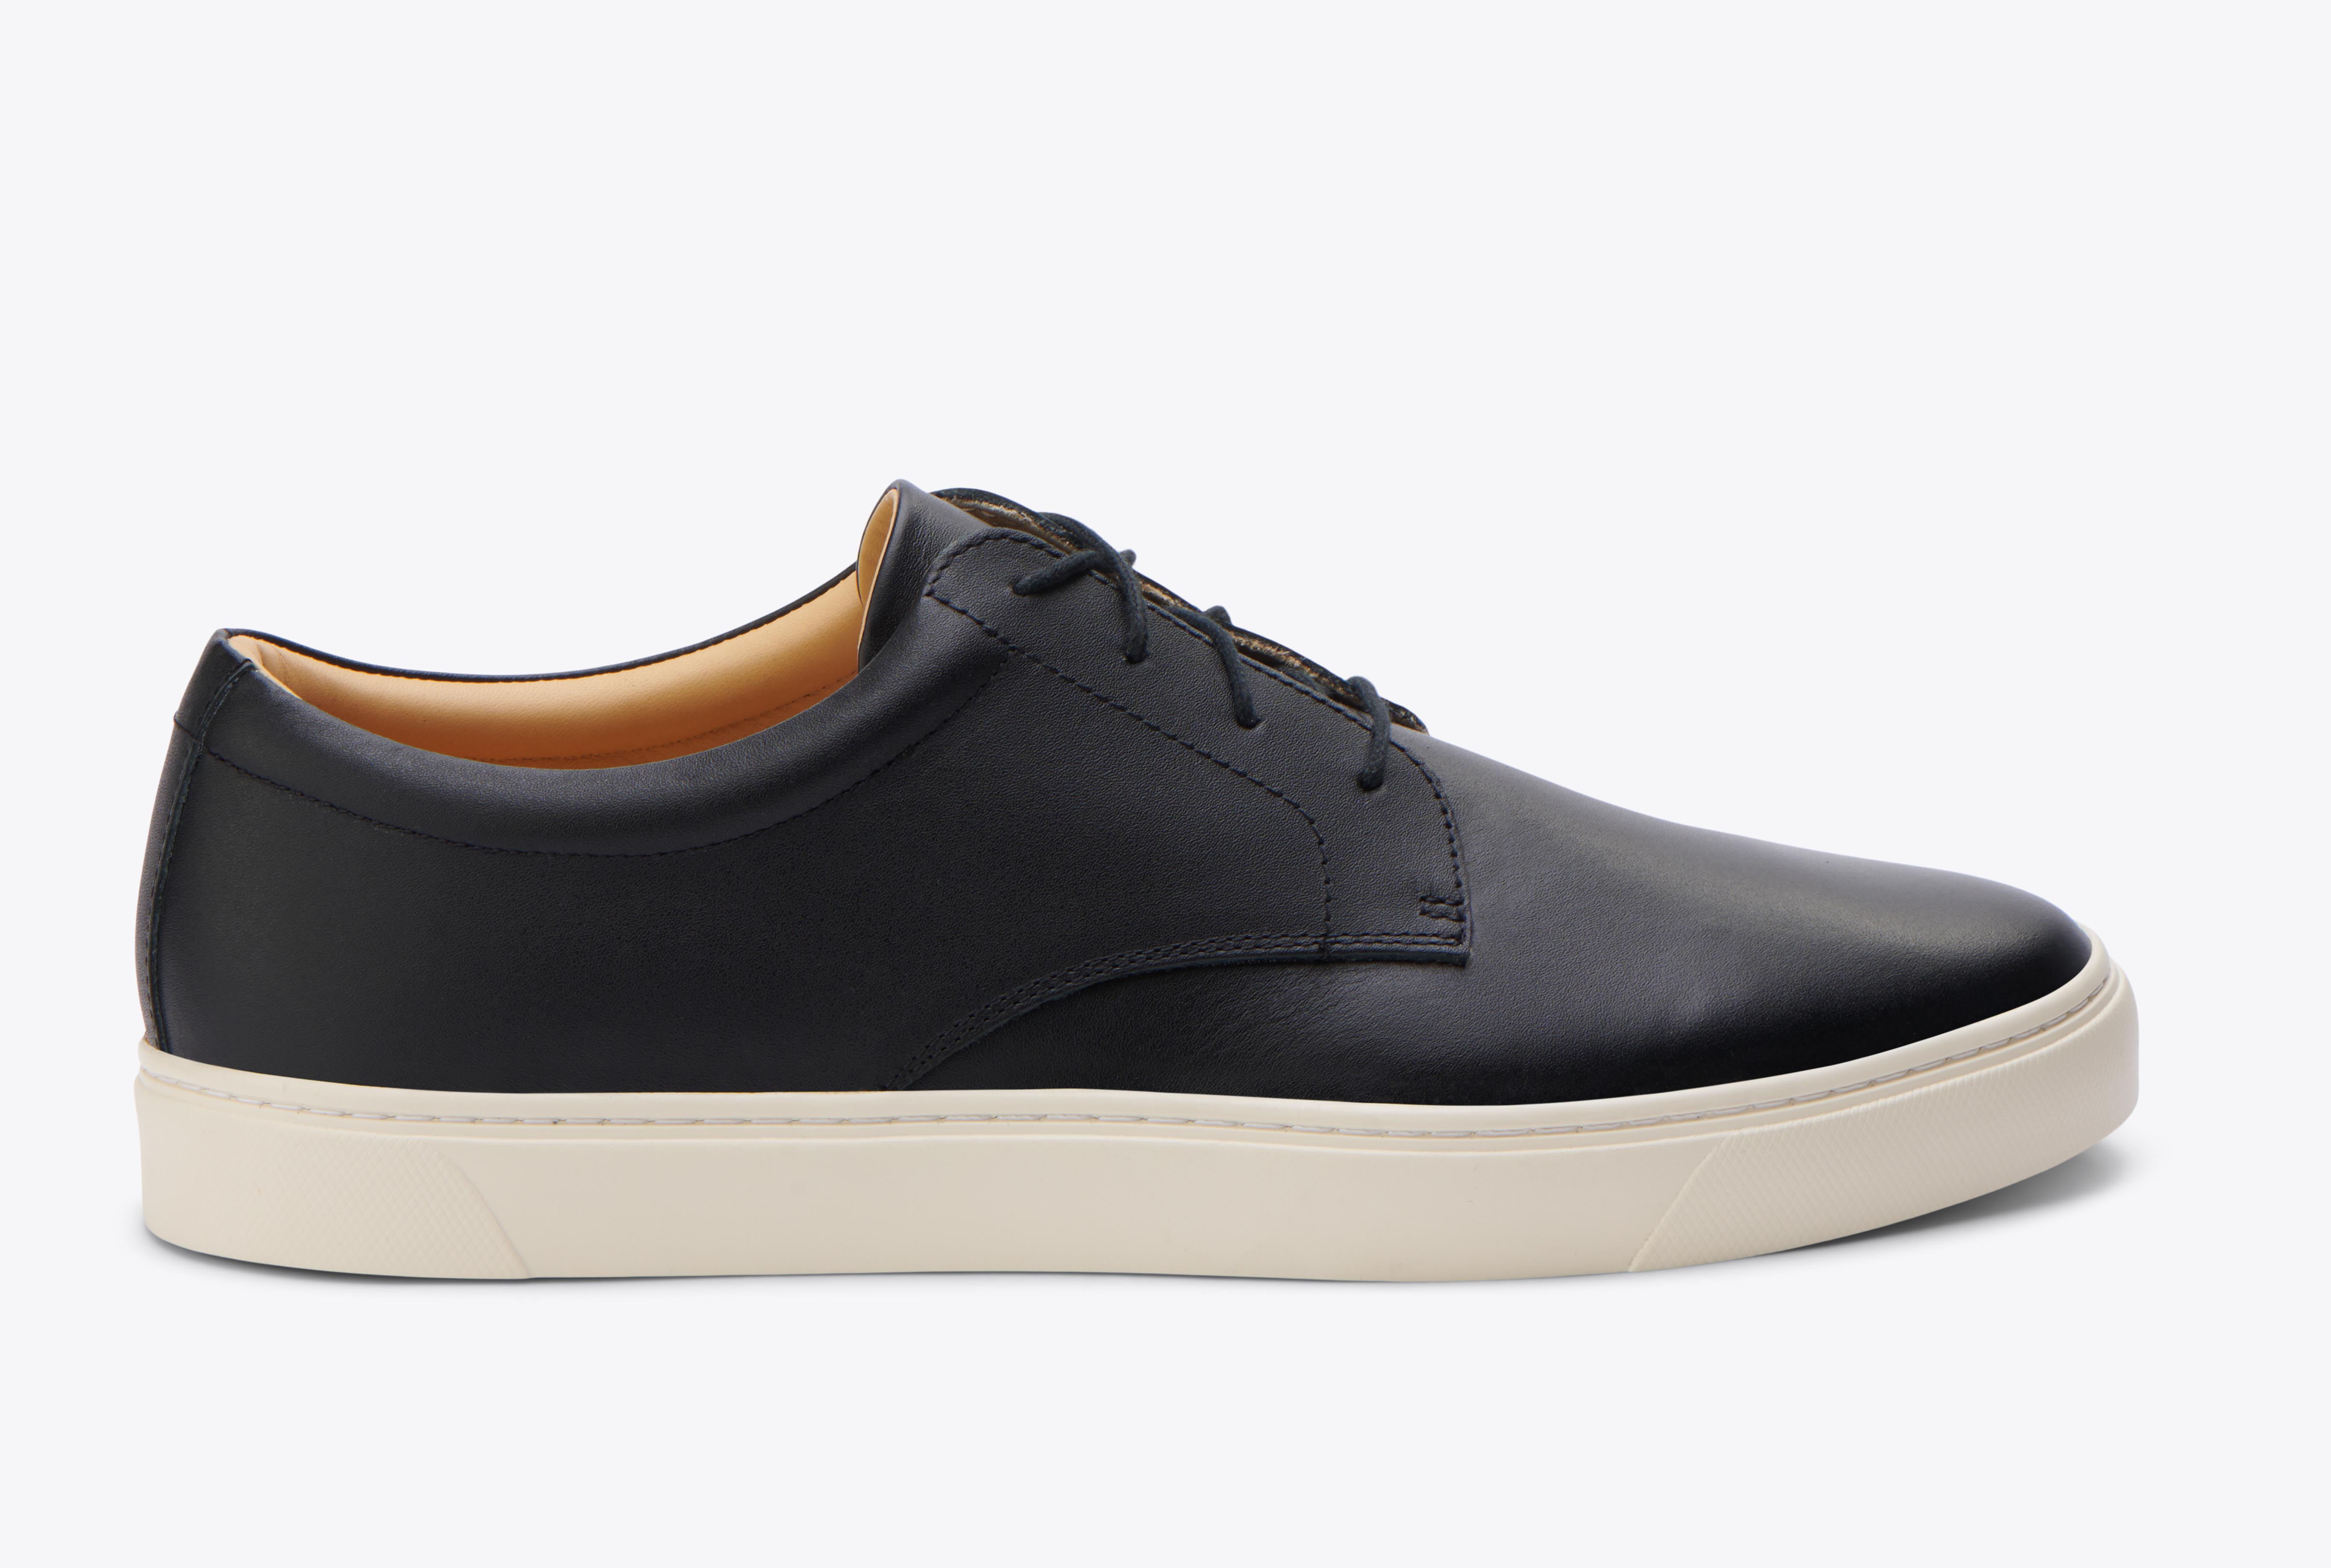 Nisolo Everyday Low Top Sneaker Black - Every Nisolo product is built on the foundation of comfort, function, and design. 